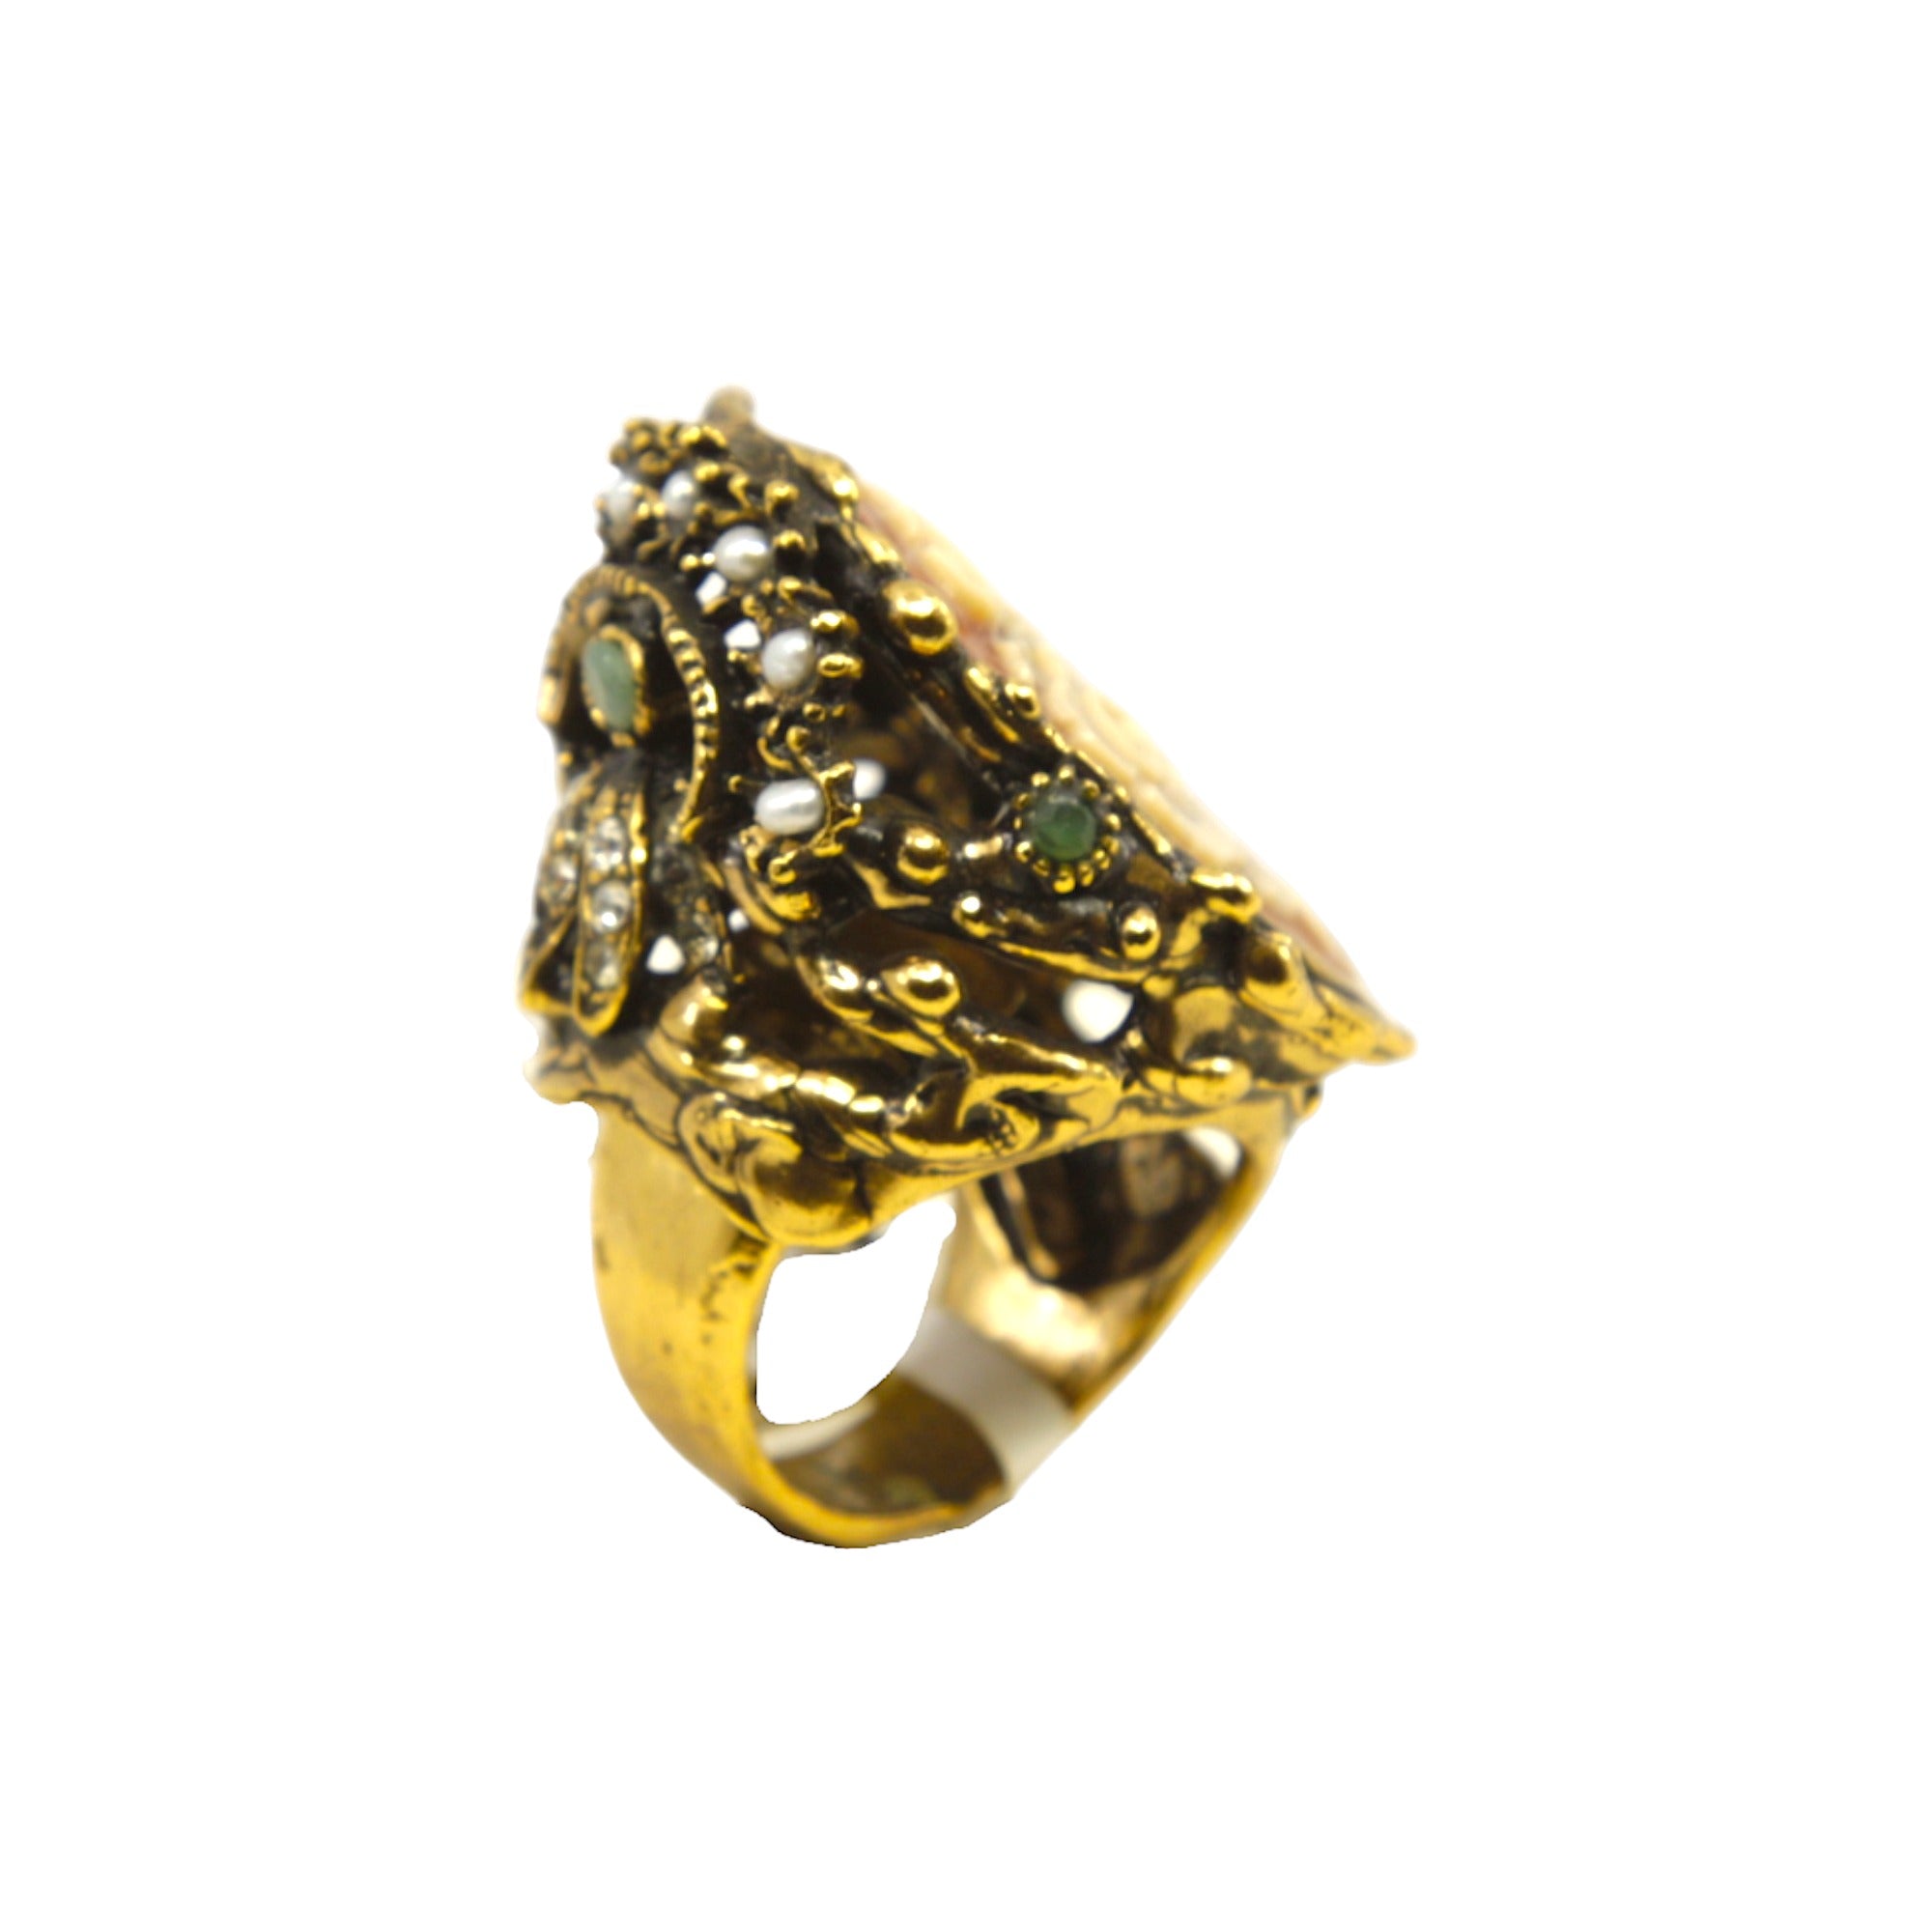 CAMMEO RING